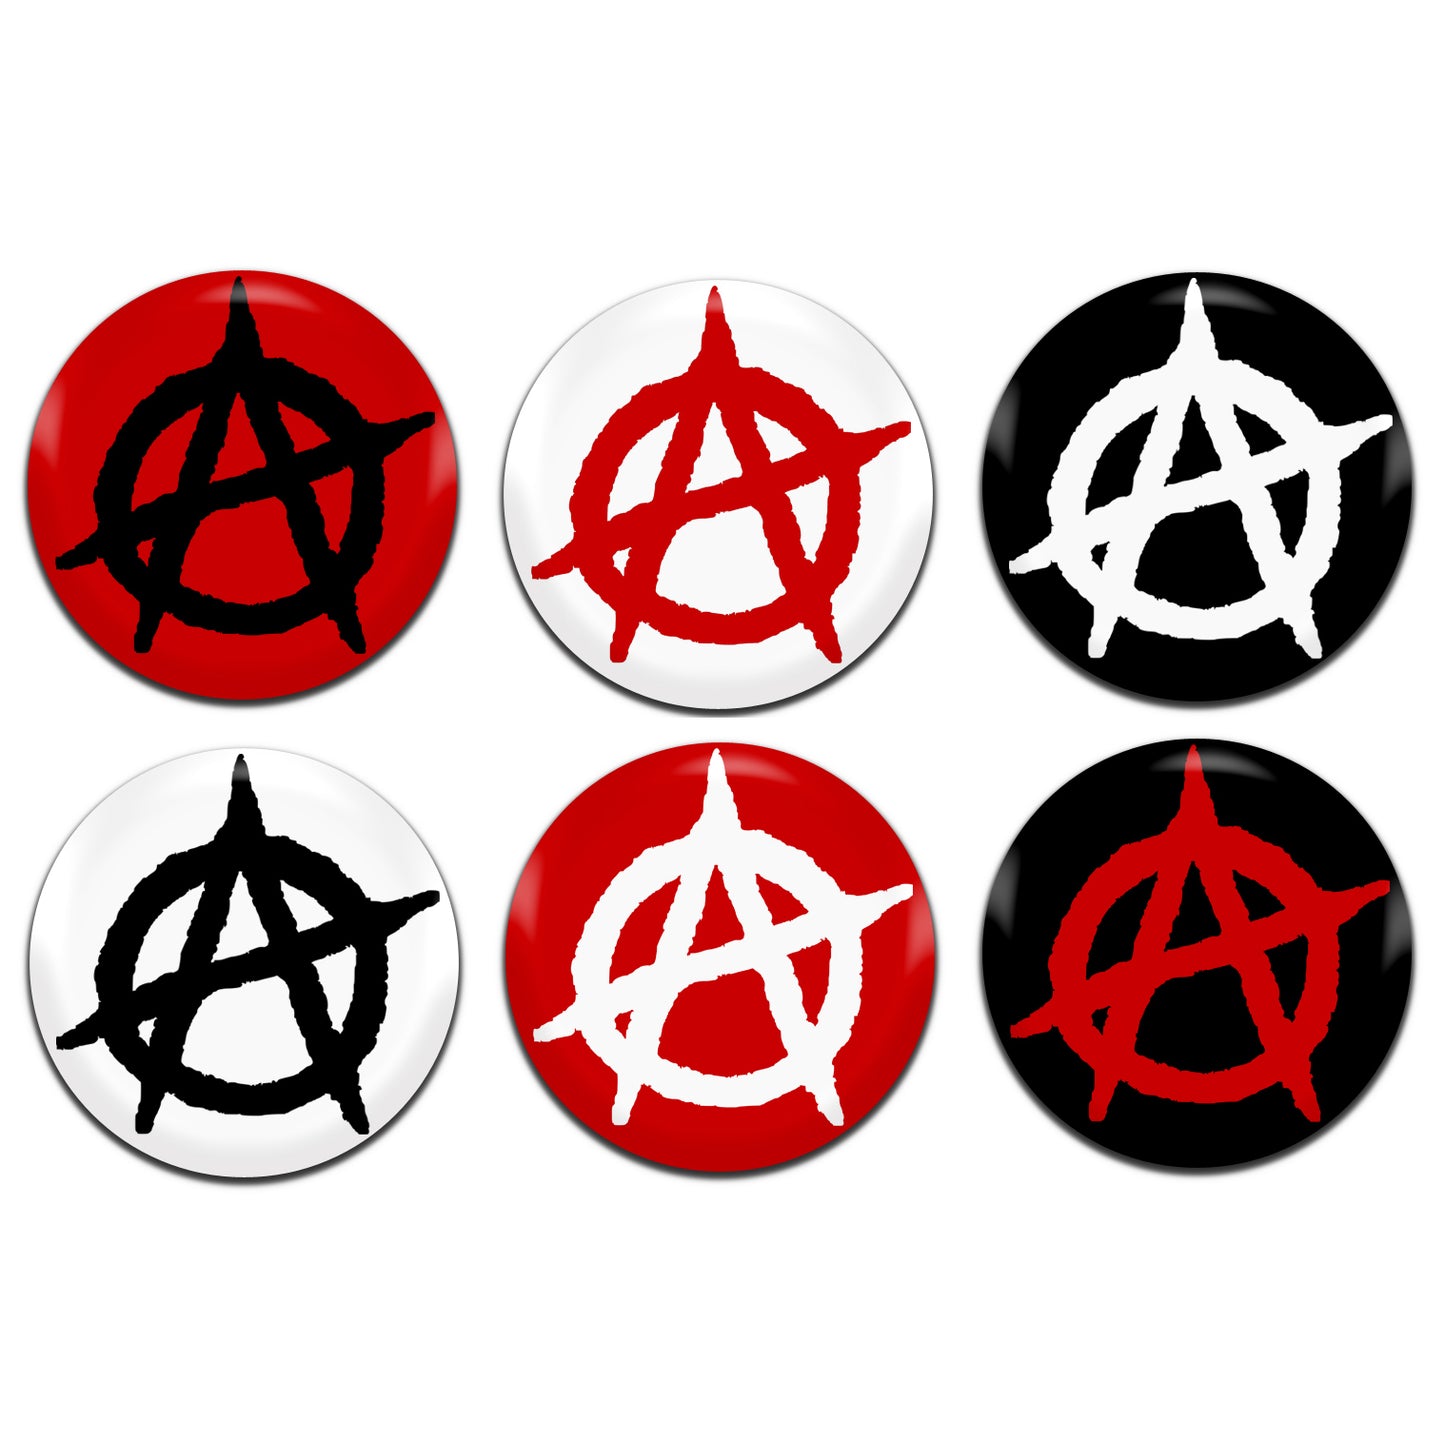 Anarchy Punk Symbol Red Black White 25mm / 1 Inch D-Pin Button Badges (6x Set)